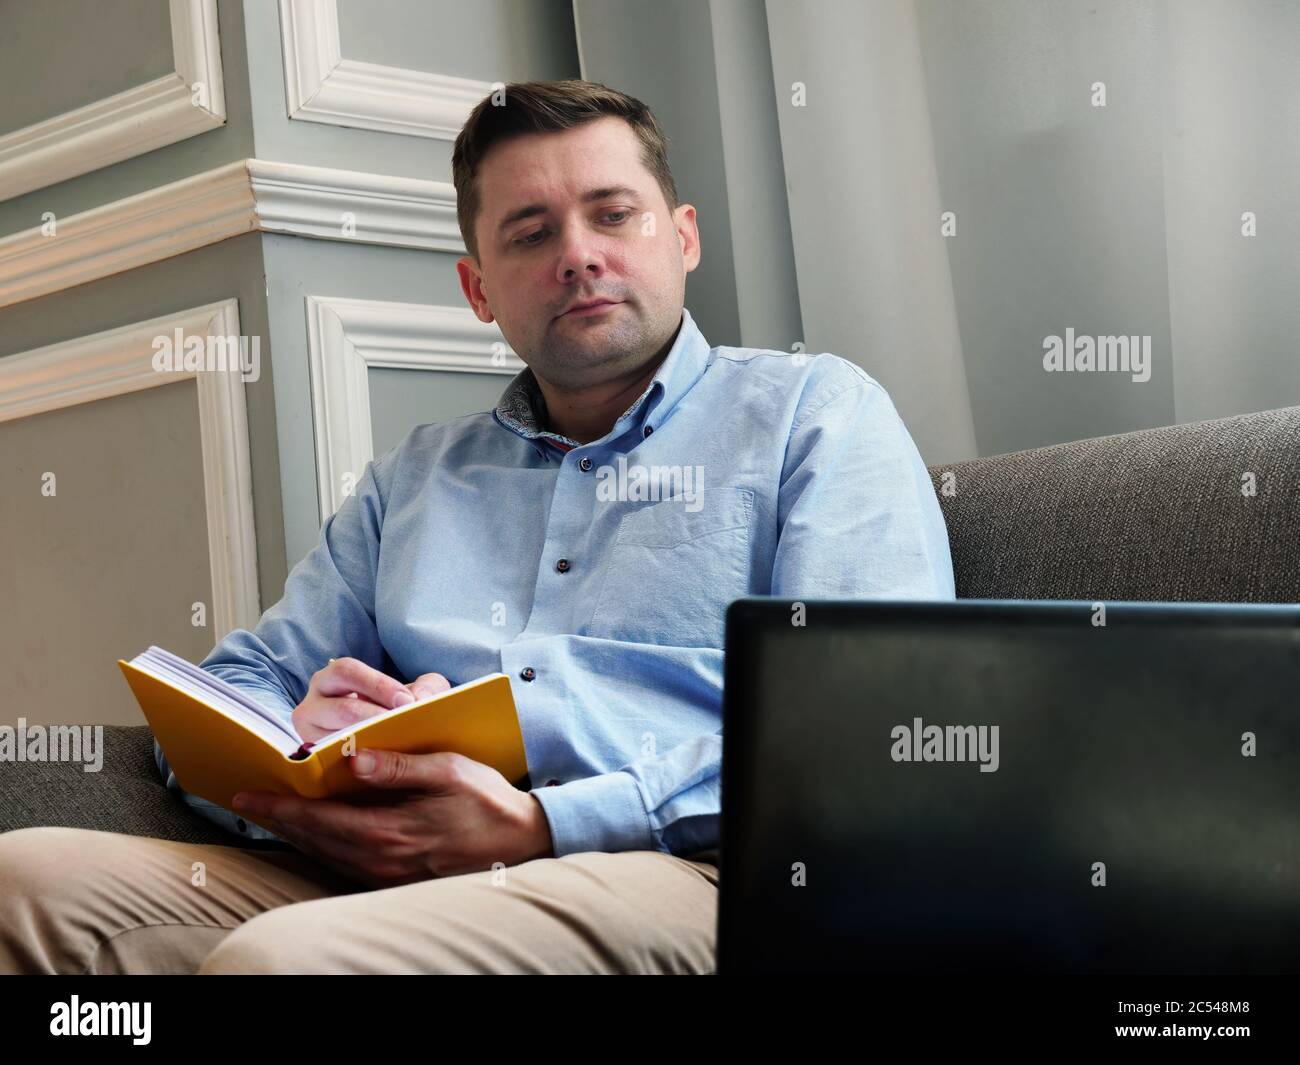 Work from home. A man checks the data and works while sitting on the couch. Stock Photo